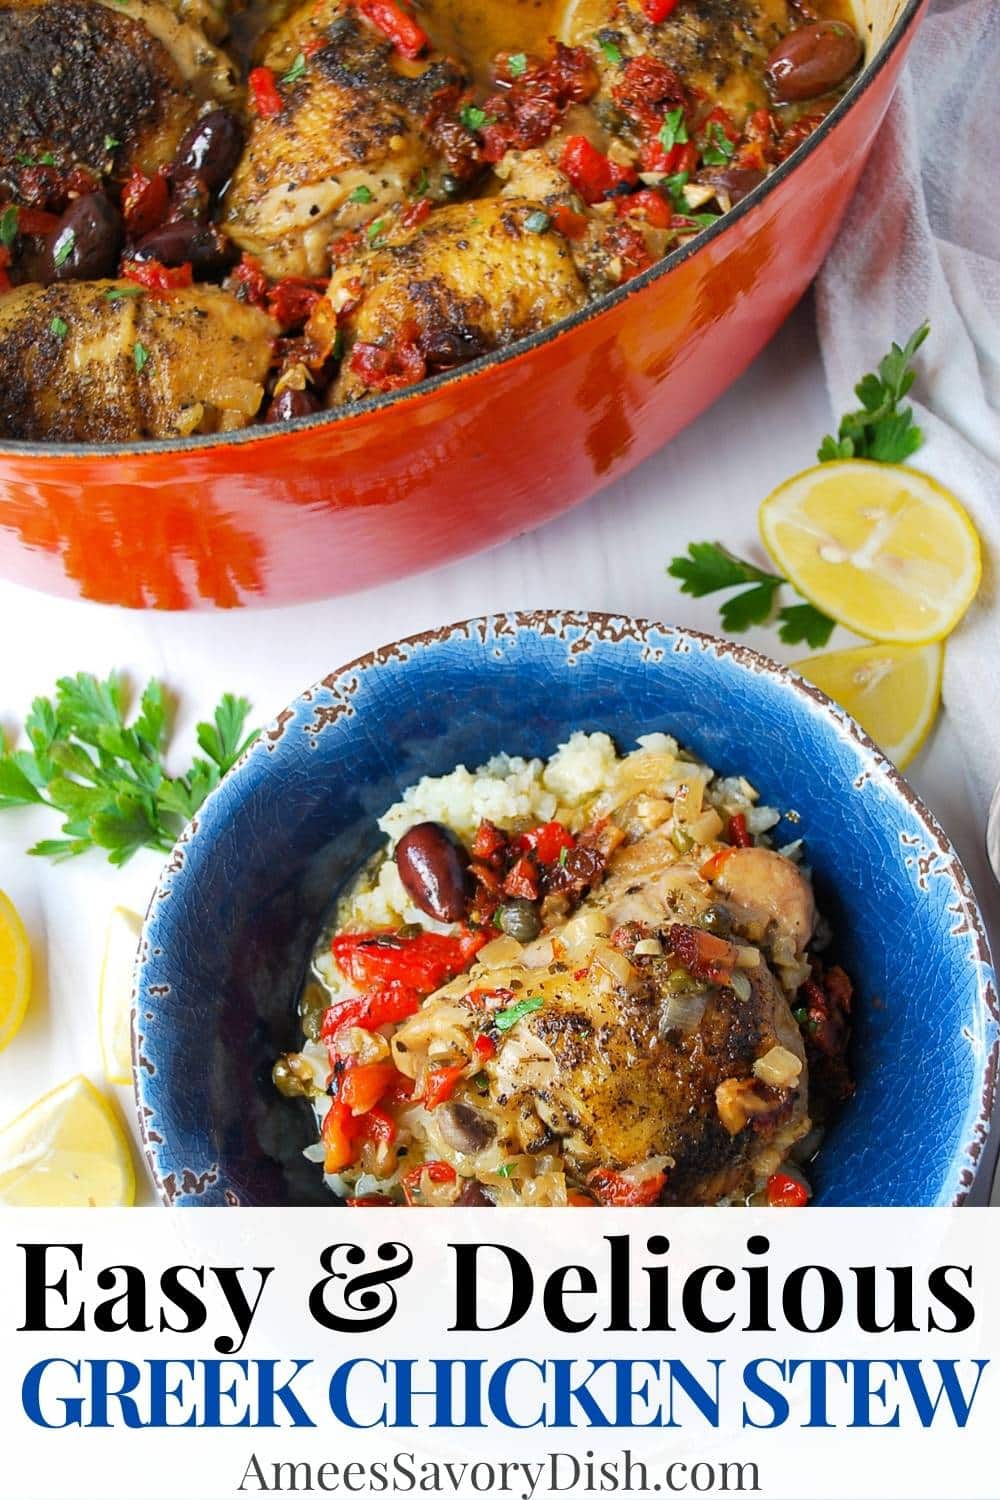 A mouthwatering recipe for braised Greek chicken stew made with fresh garlic, olives, tomatoes, roasted peppers, capers, and Mediterranean spices. via @Ameessavorydish